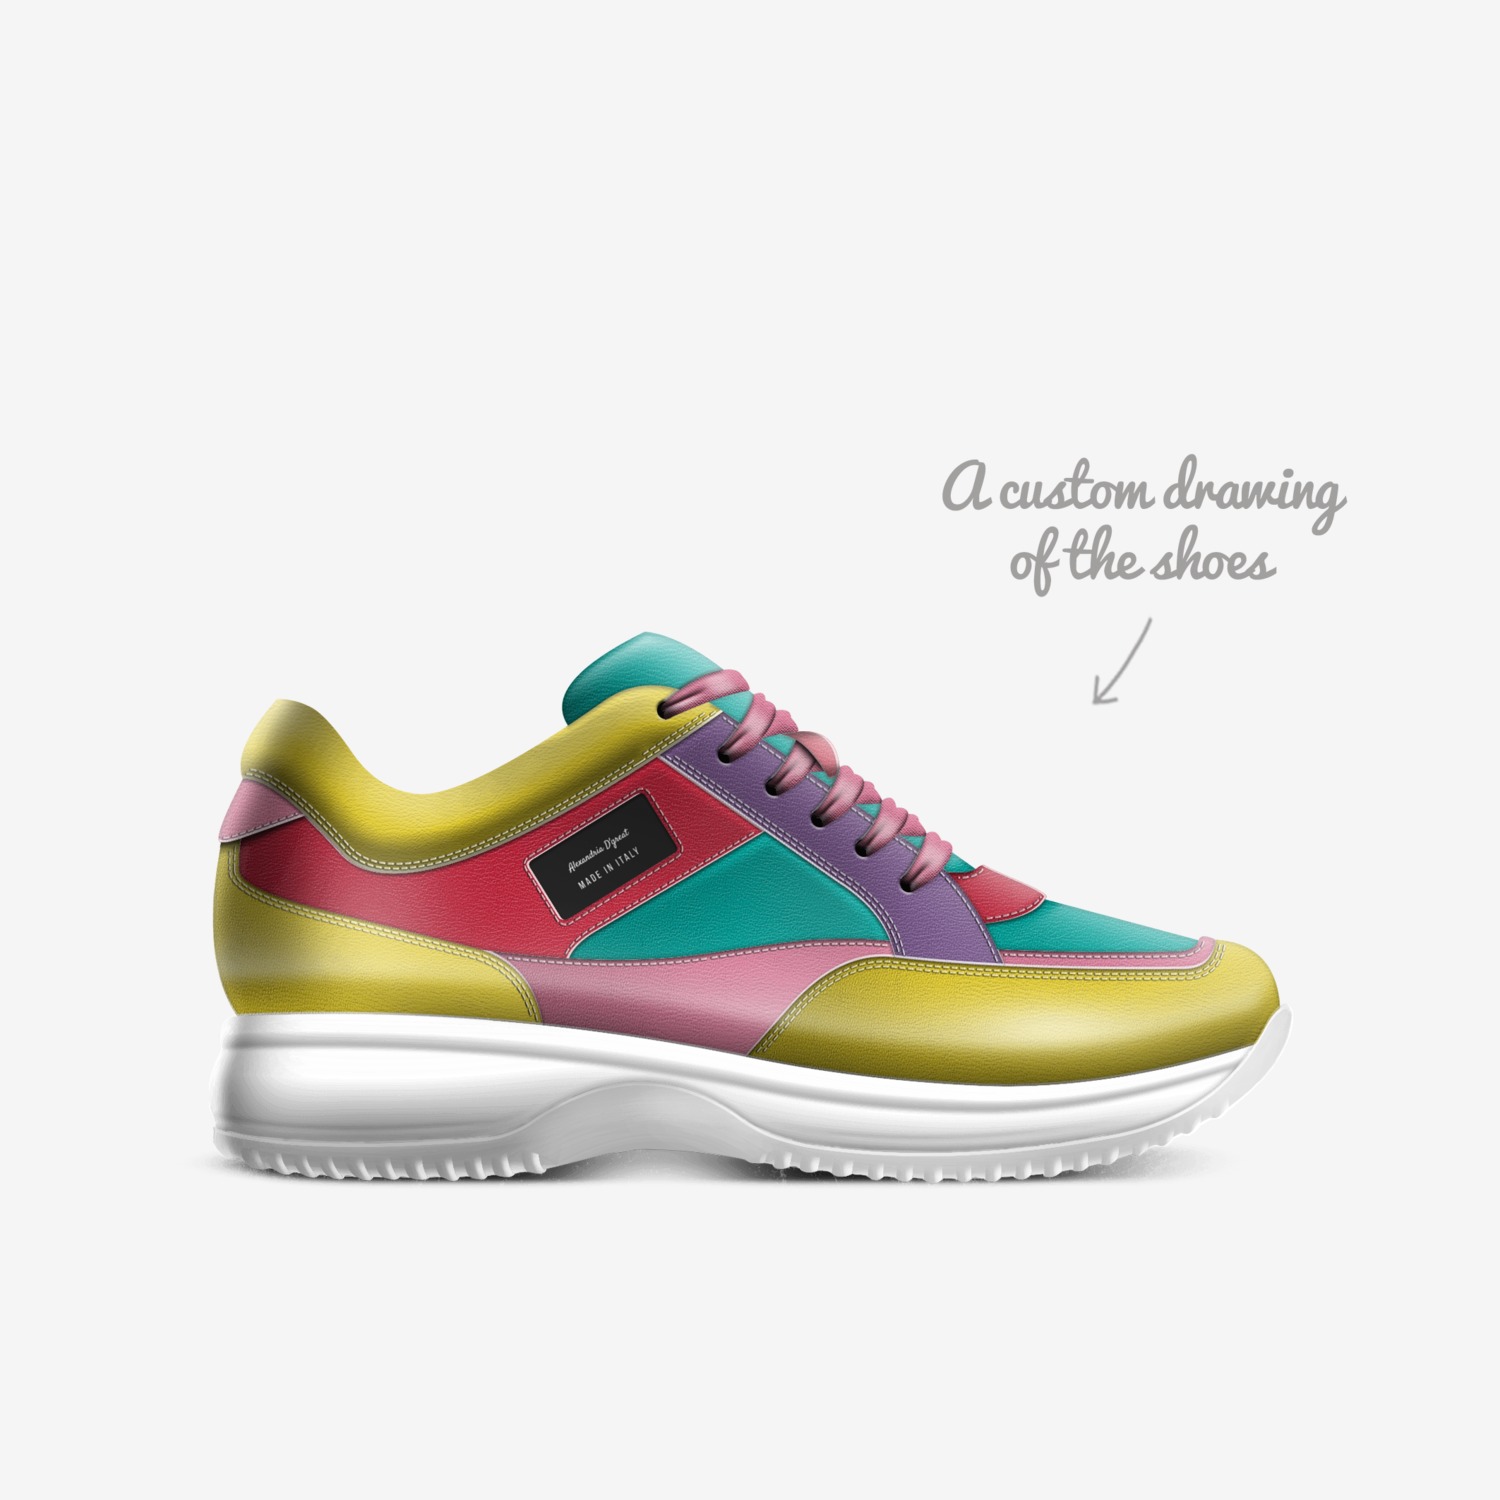 Alexandria D'great A Shoe concept by Makaila